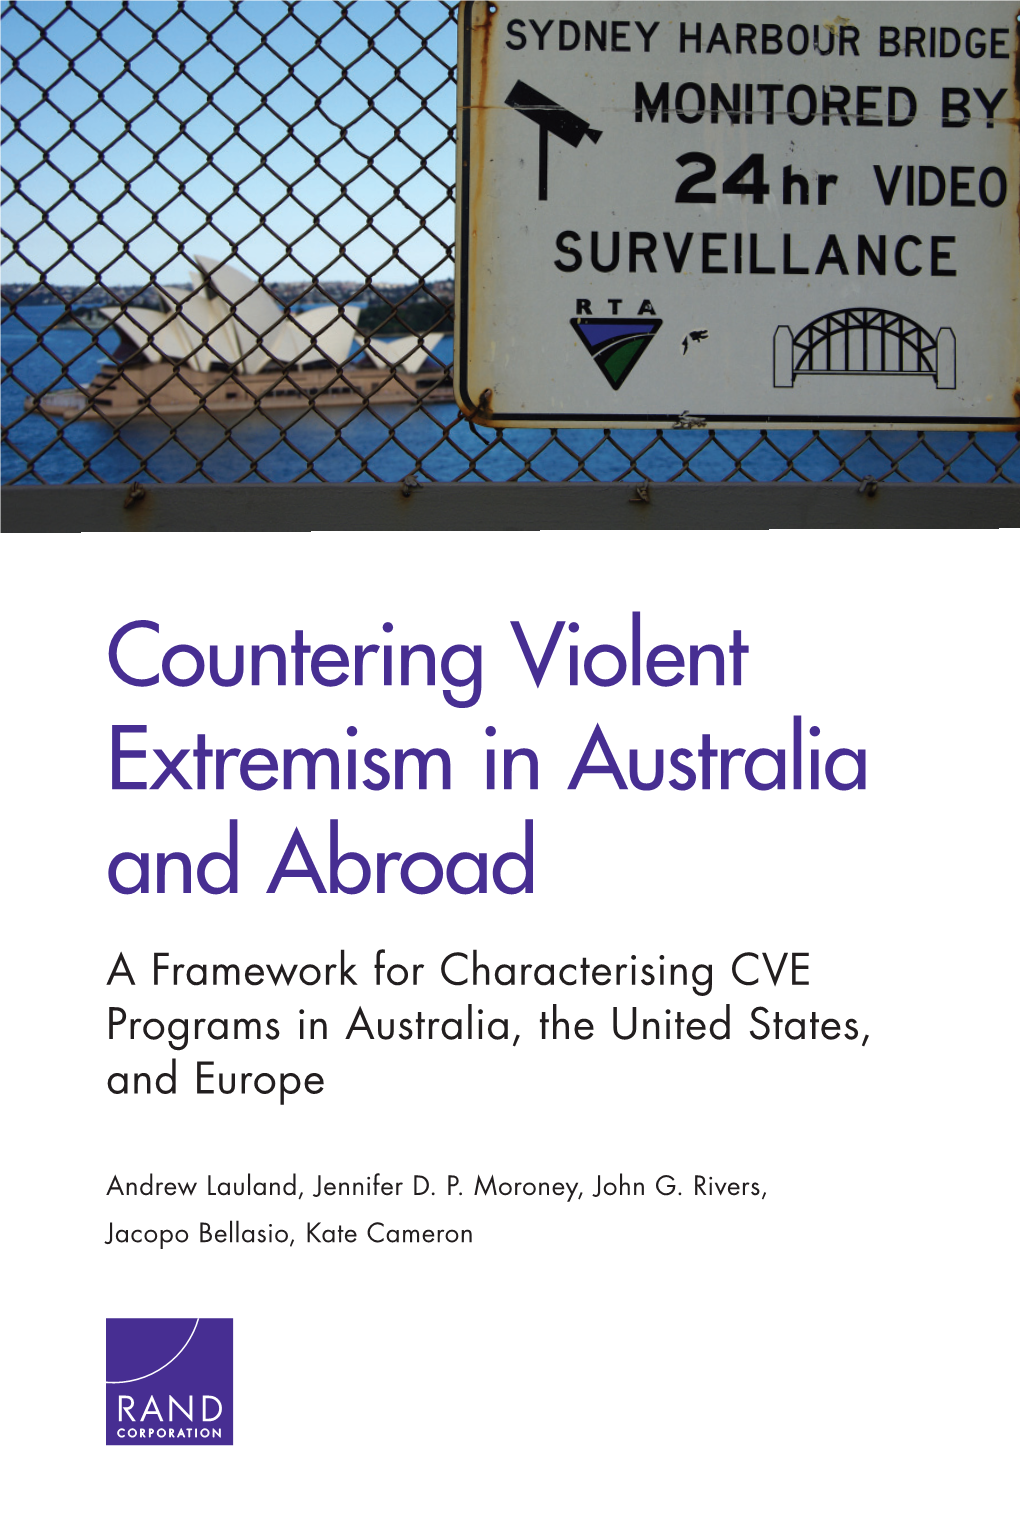 Countering Violent Extremism in Australia and Abroad a Framework for Characterising CVE Programs in Australia, the United States, and Europe